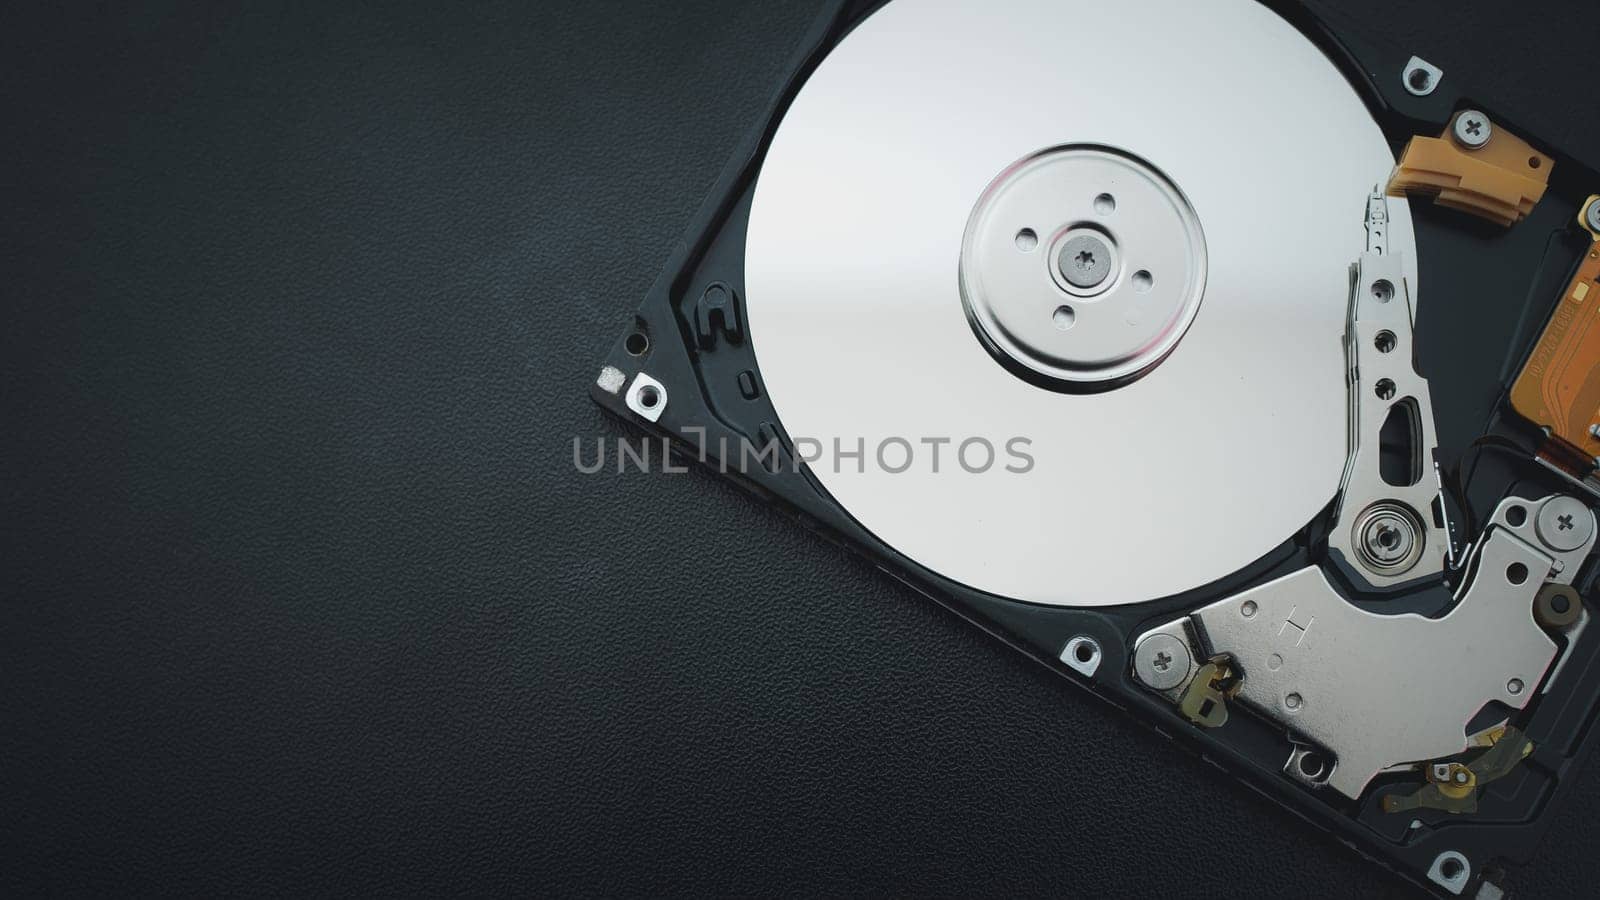 Disassembled open hard disk drive HDD of computer or laptop lies on dark matte surface. Сomputer hardware and equipment. Harddisk data storage.